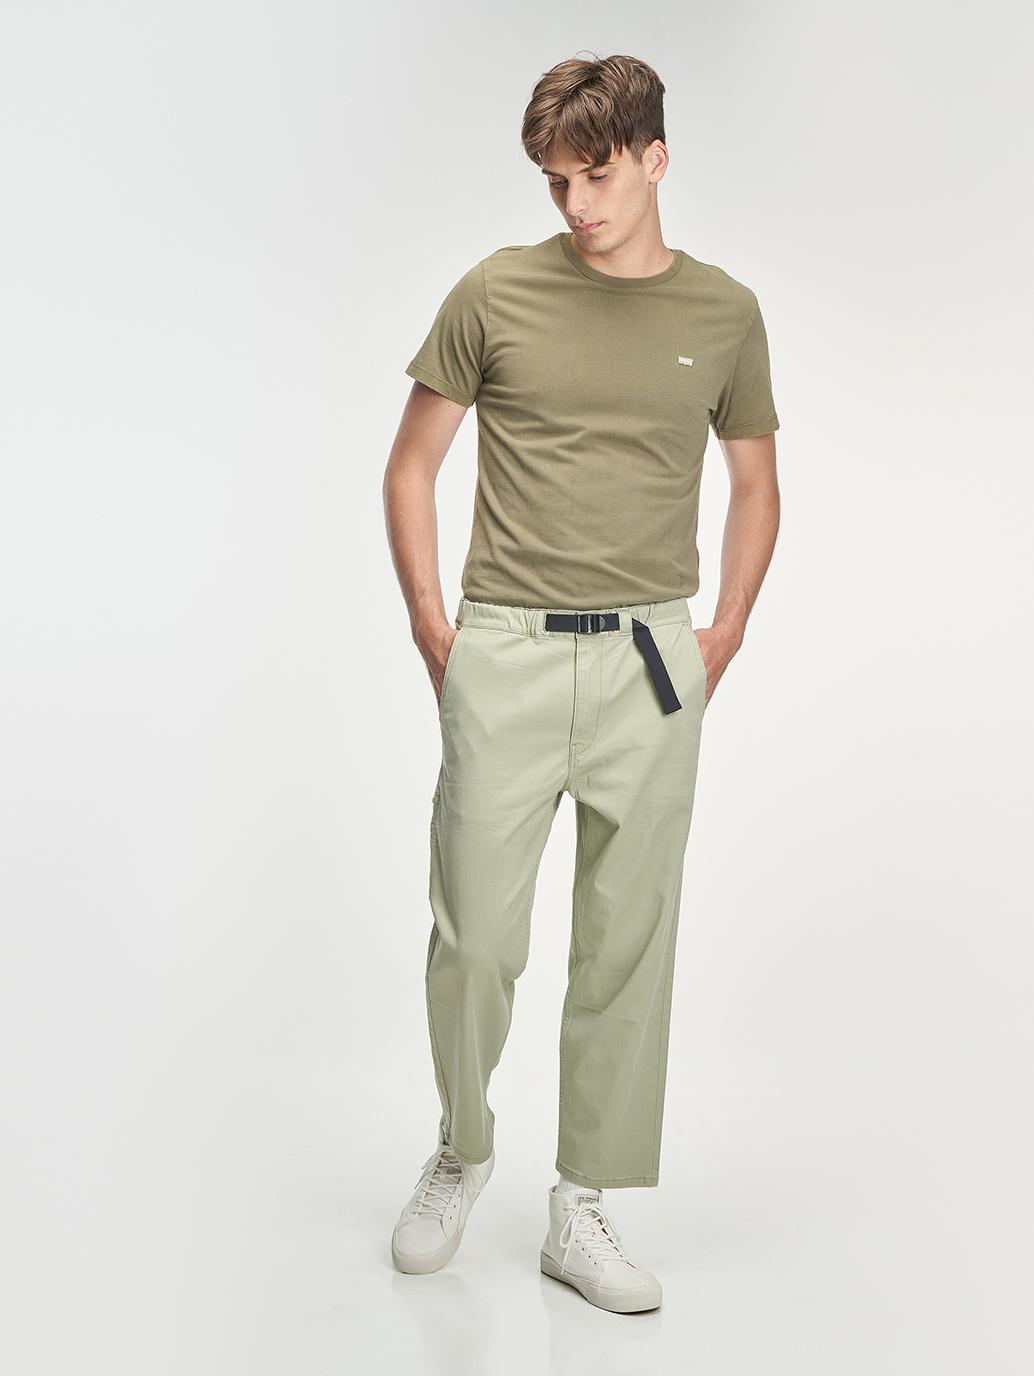 levis malaysia mens crop utility chino A10450001 13 Details